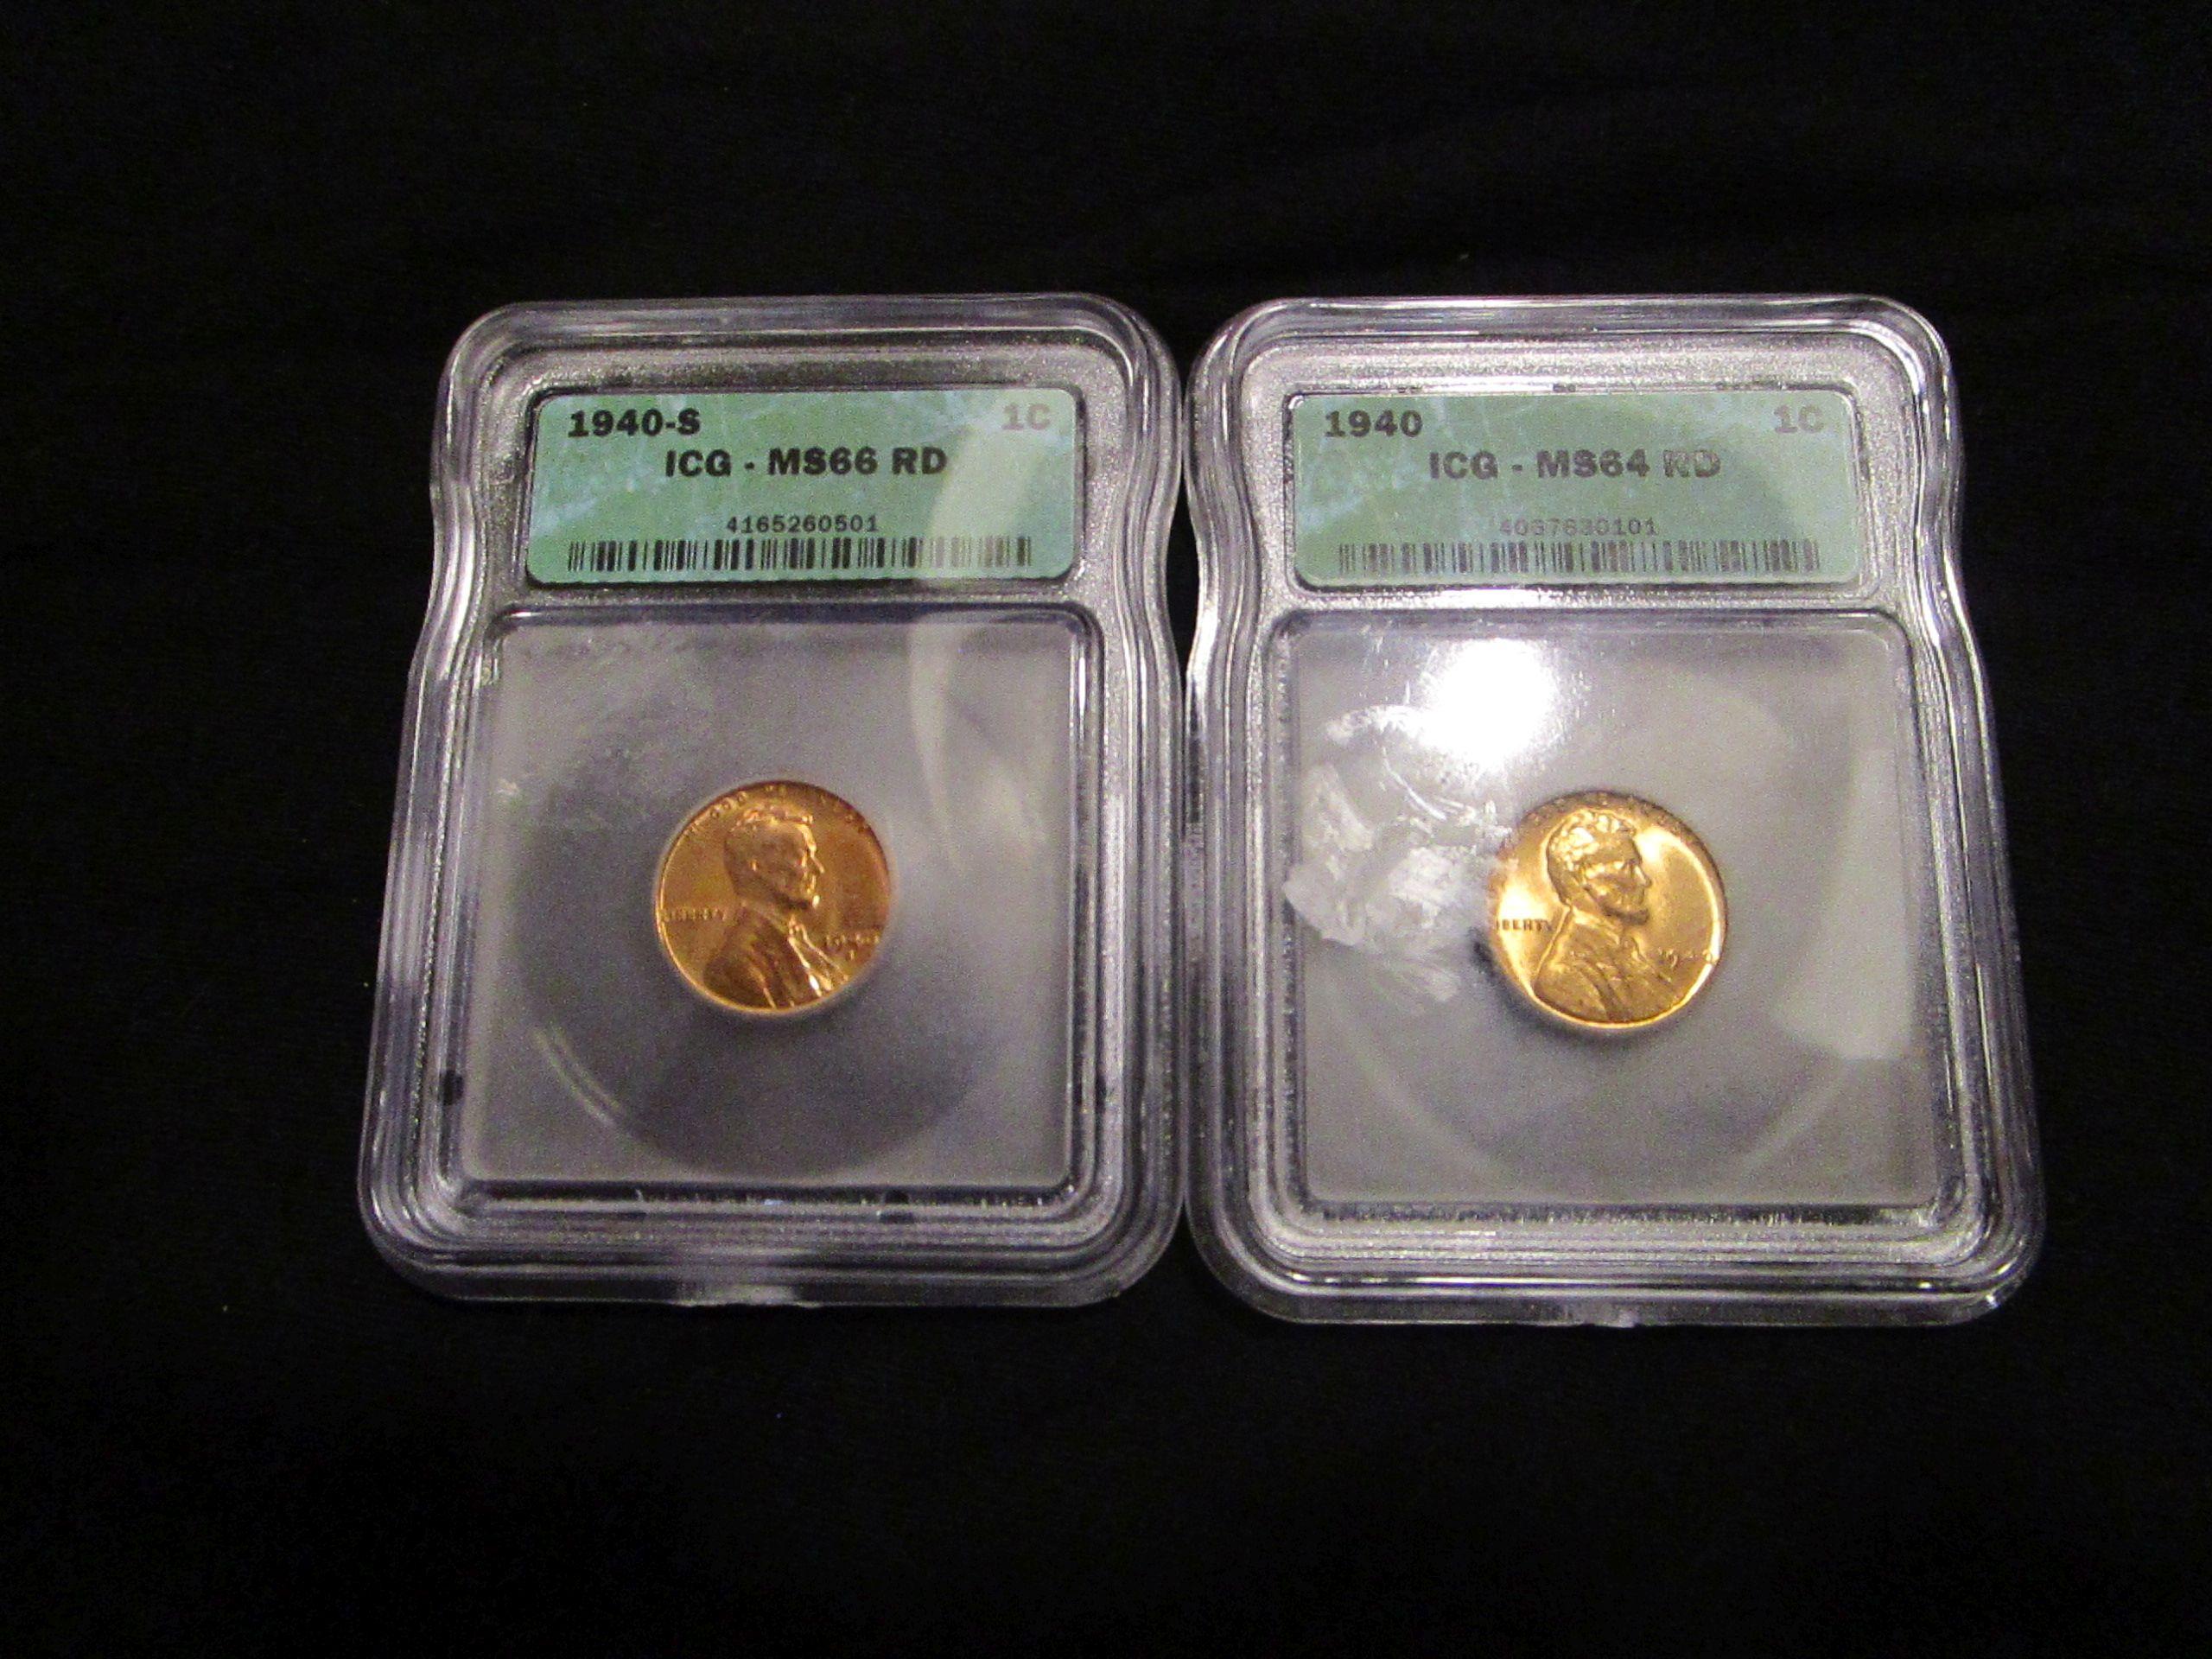 1940 & 1940S US Pennies - Lot of 2 - Graded MS 66 RD and MS 64 Rd by ICG